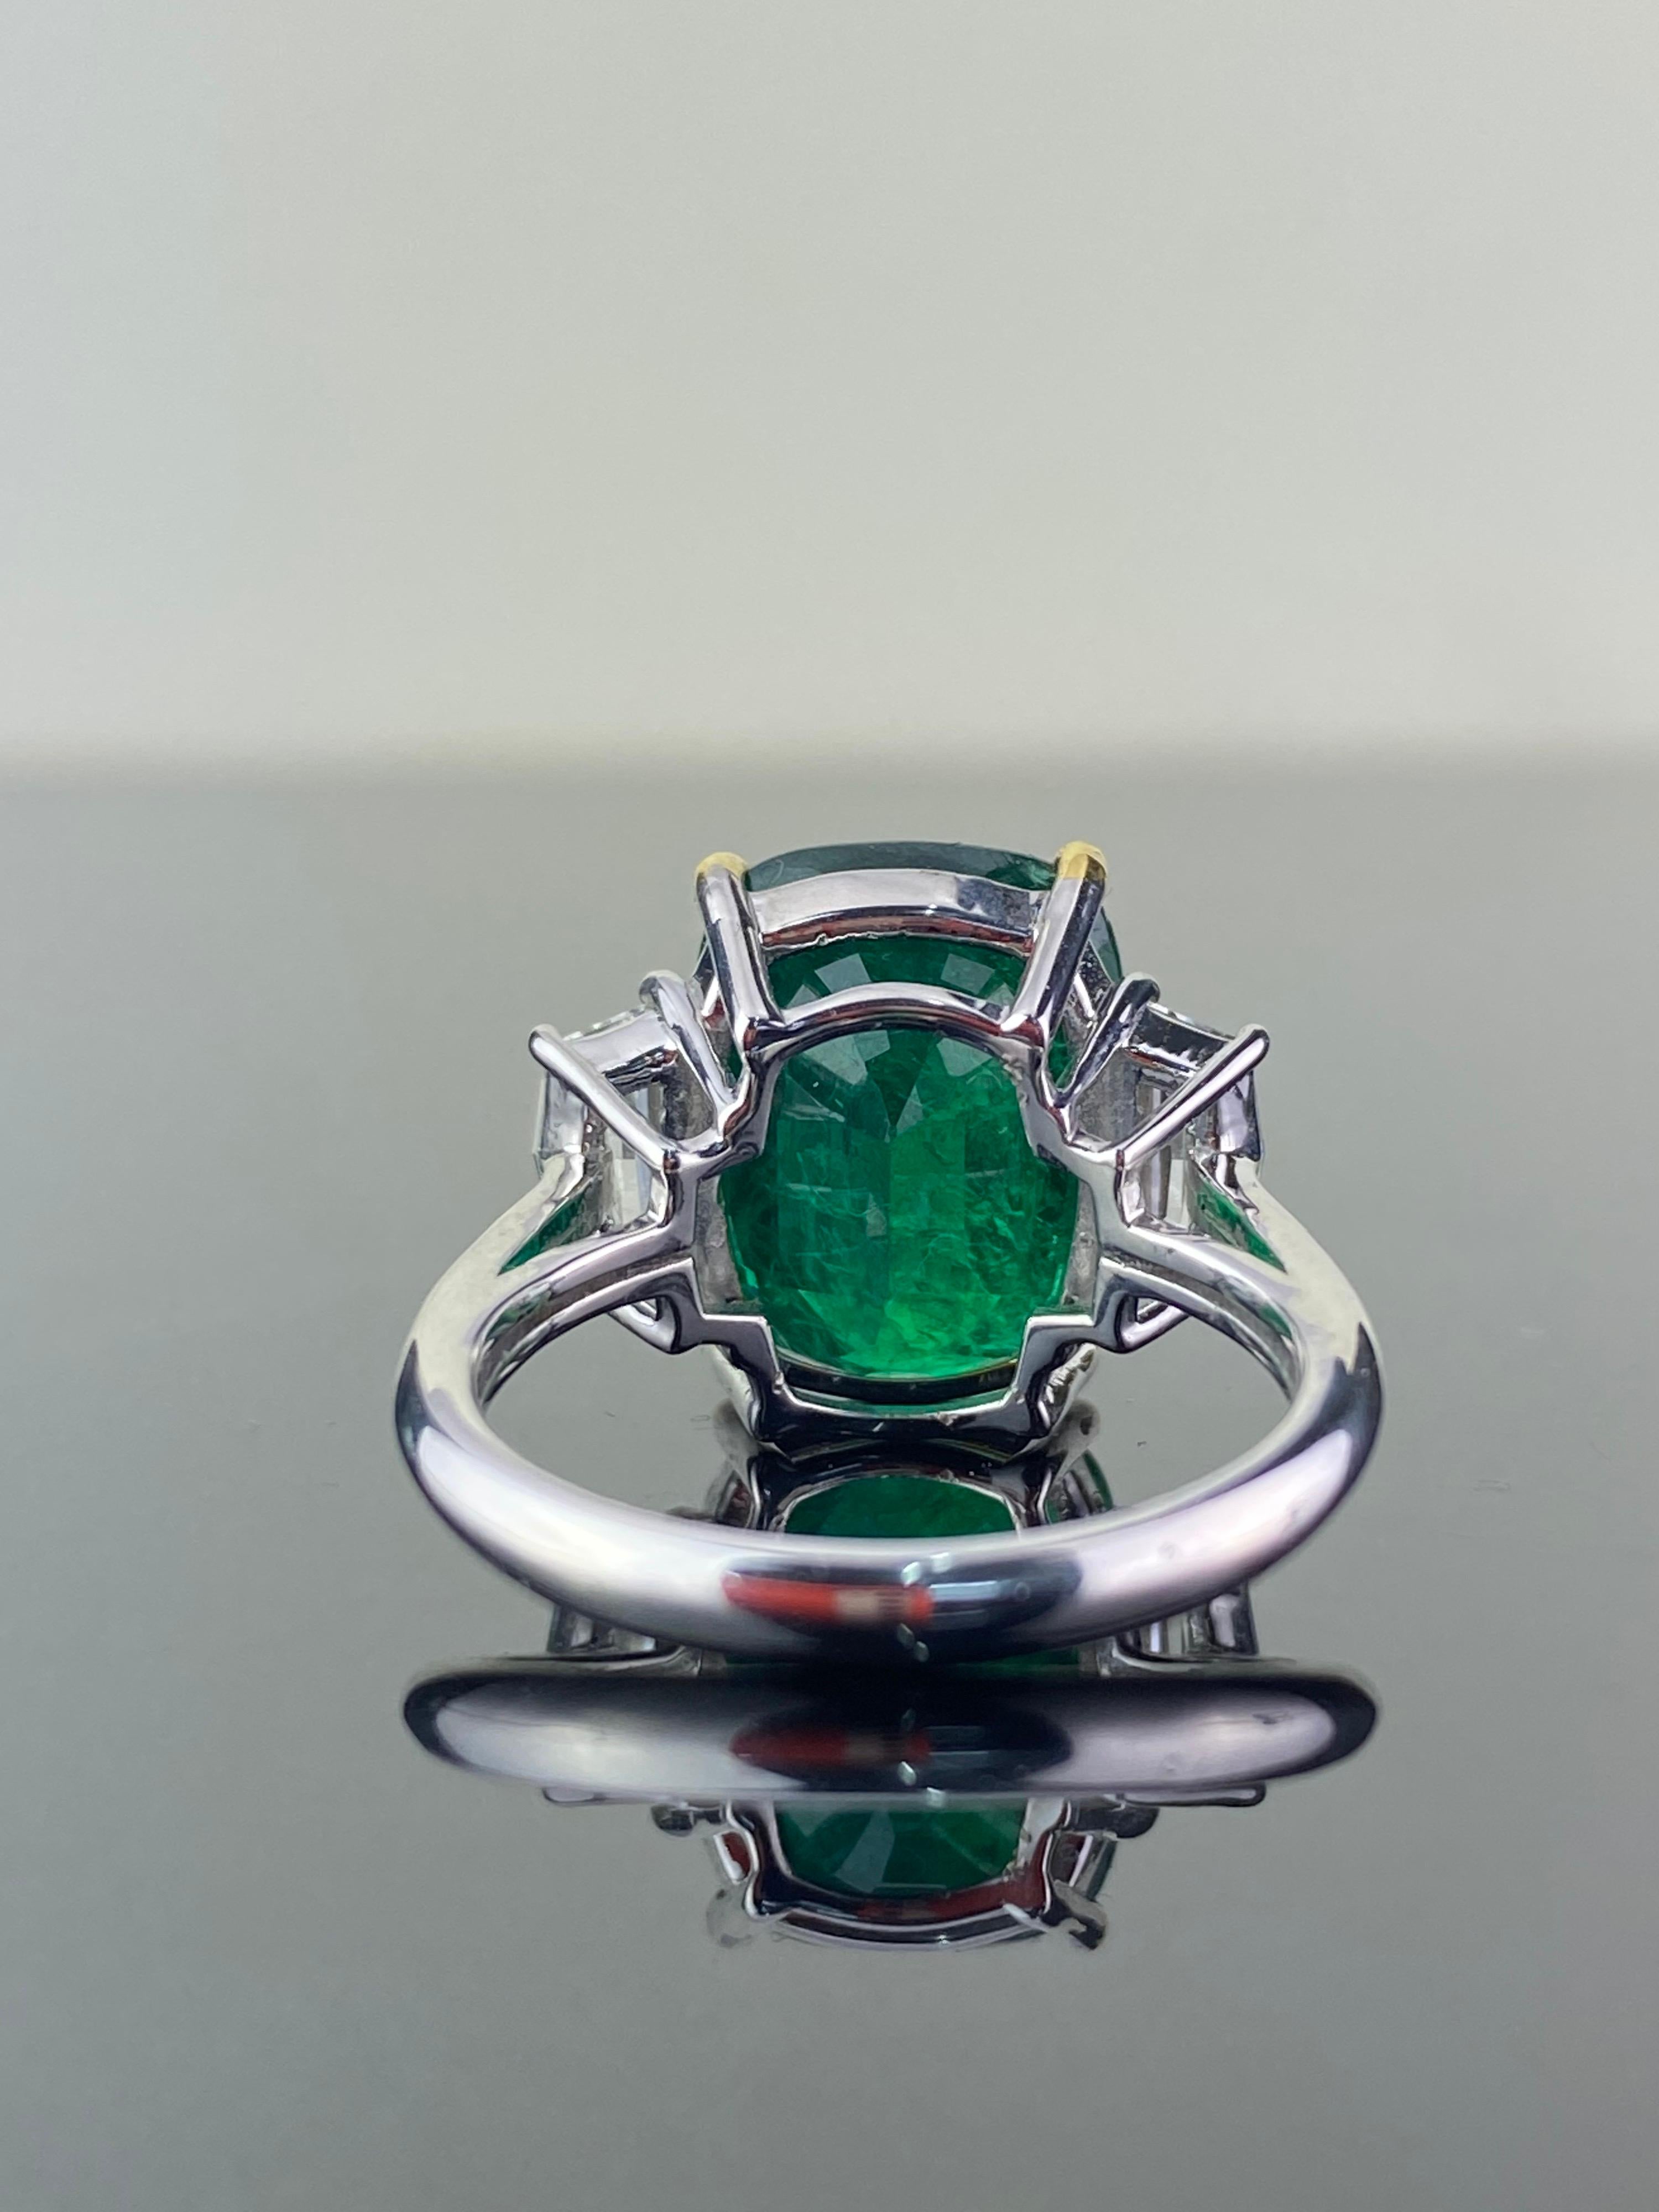 A classic 7.88 carat Emerald and 0.86 carat Diamond three-stone engagement ring. The cushion-shape Emerald is transparent, with a beautiful ideal vivid green color, and is adorned by a pair of special cadillac-cut White Diamonds of VS quality, F